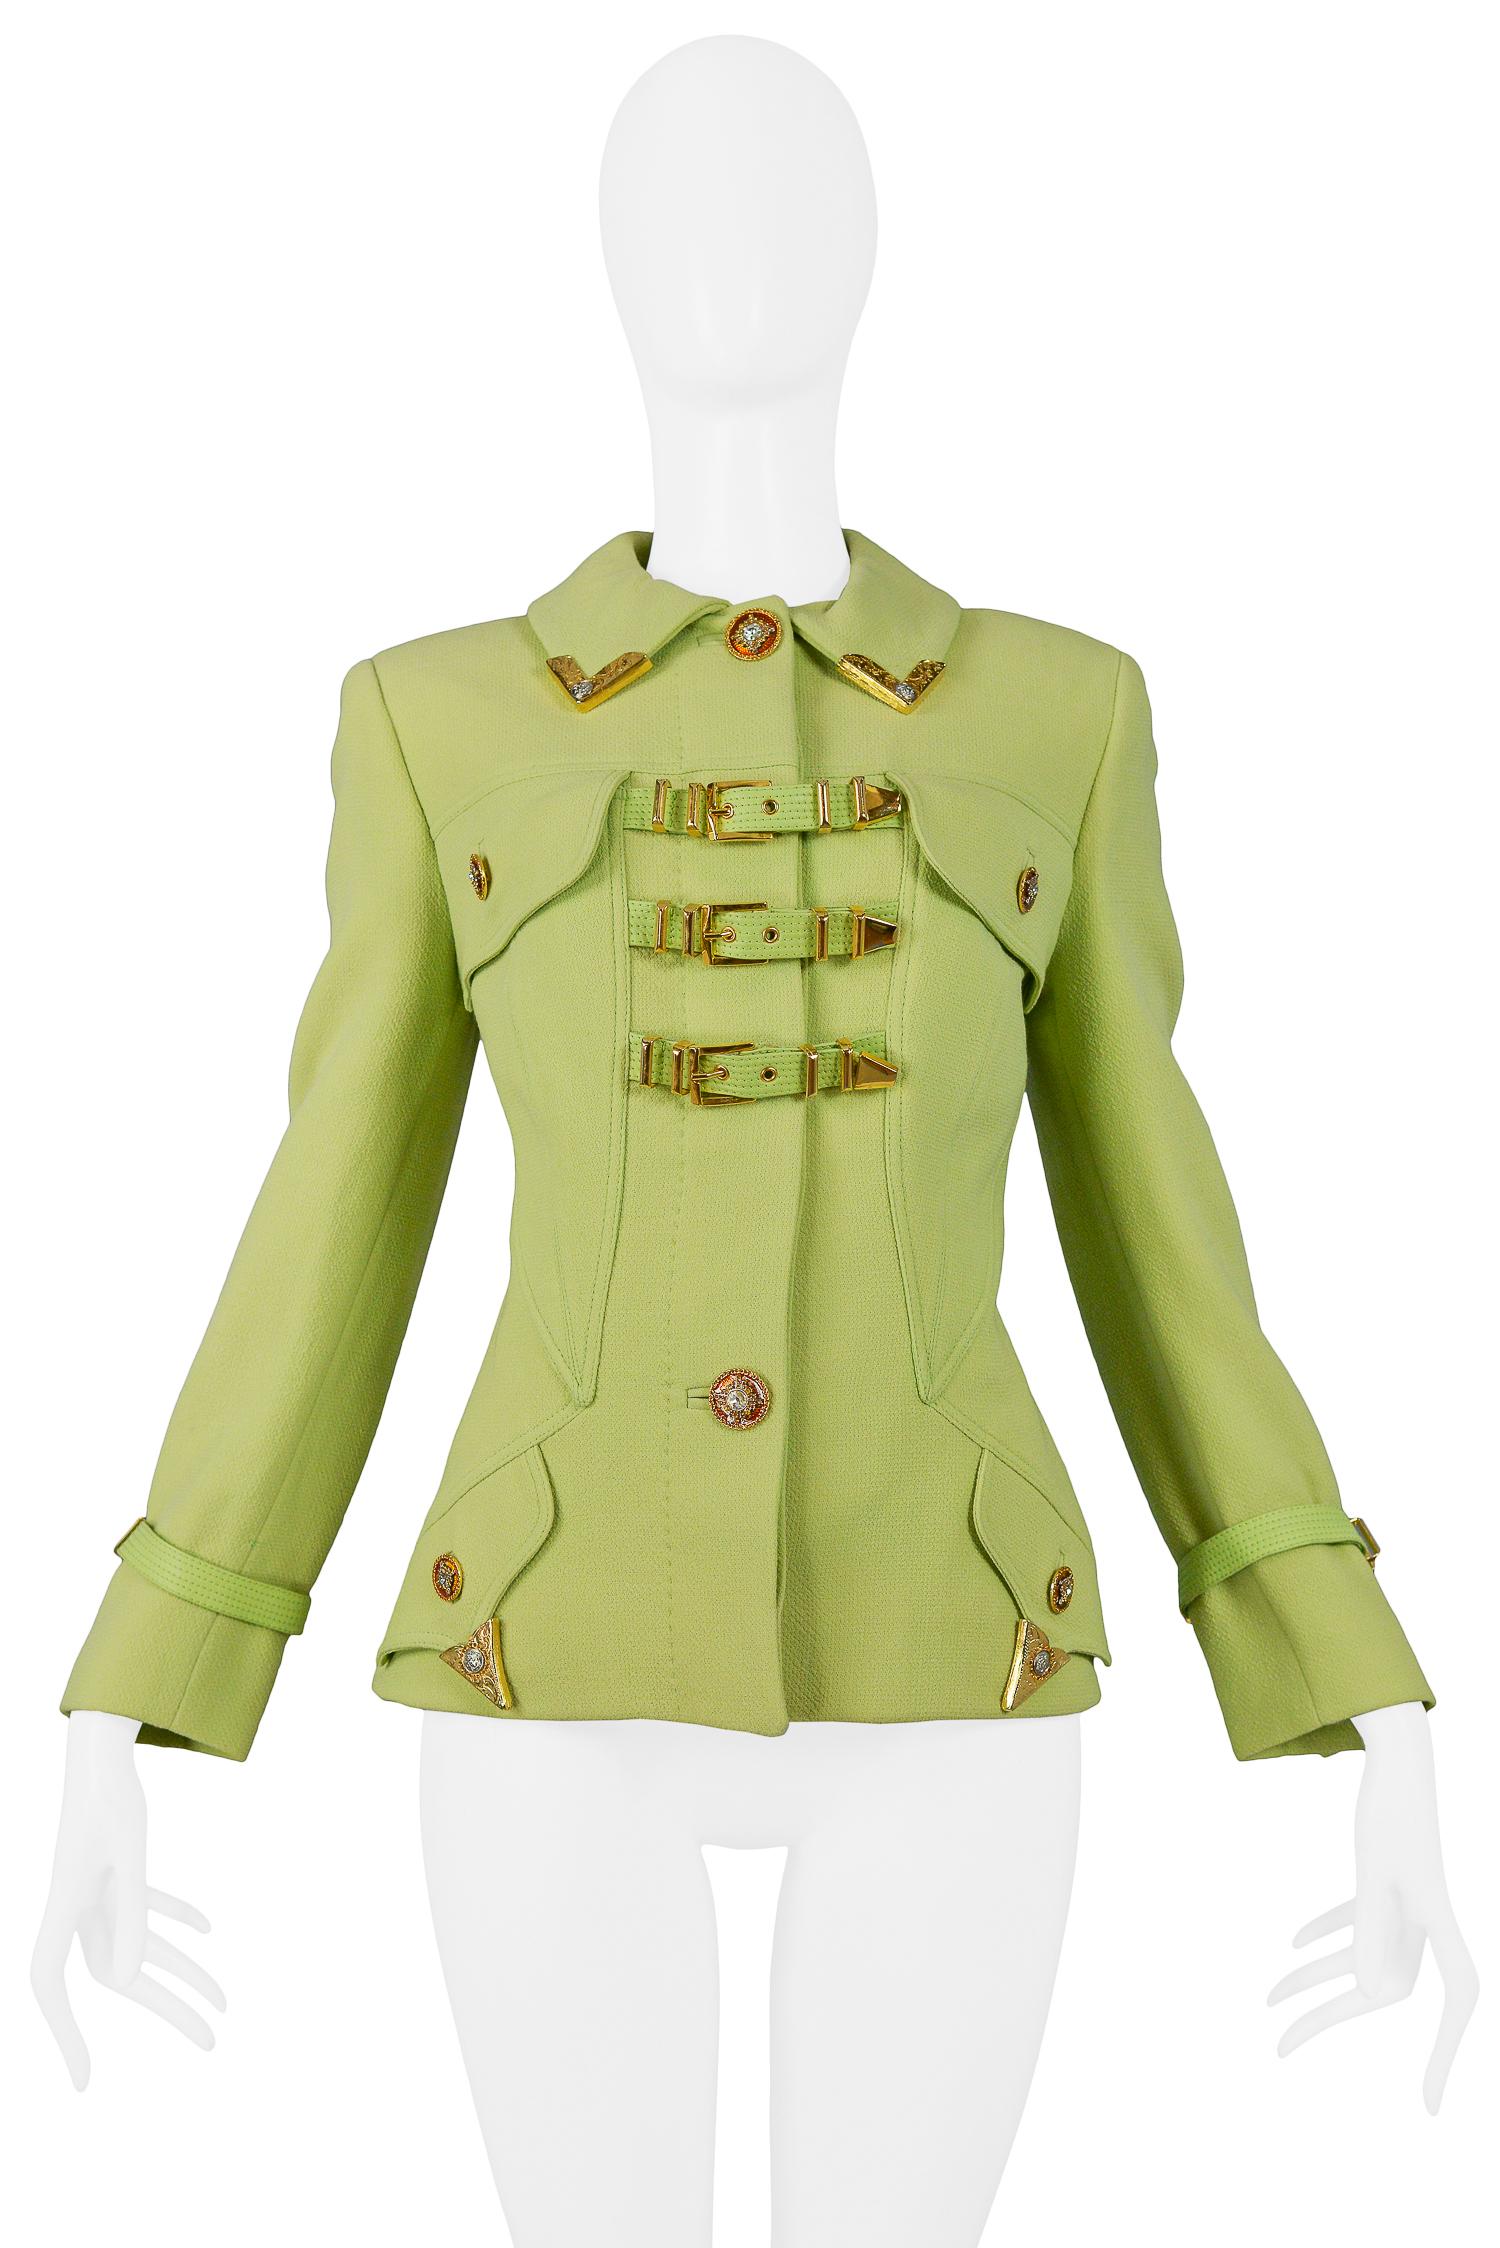 Iconic vintage Gianni Versace chartreuse green bondage jacket. The jacket features  gold-tone bondage buckles at center front and cuffs, enameled rhinestone buttons, and western inspired corner tips at collar and pockets. From the 1992 collection.